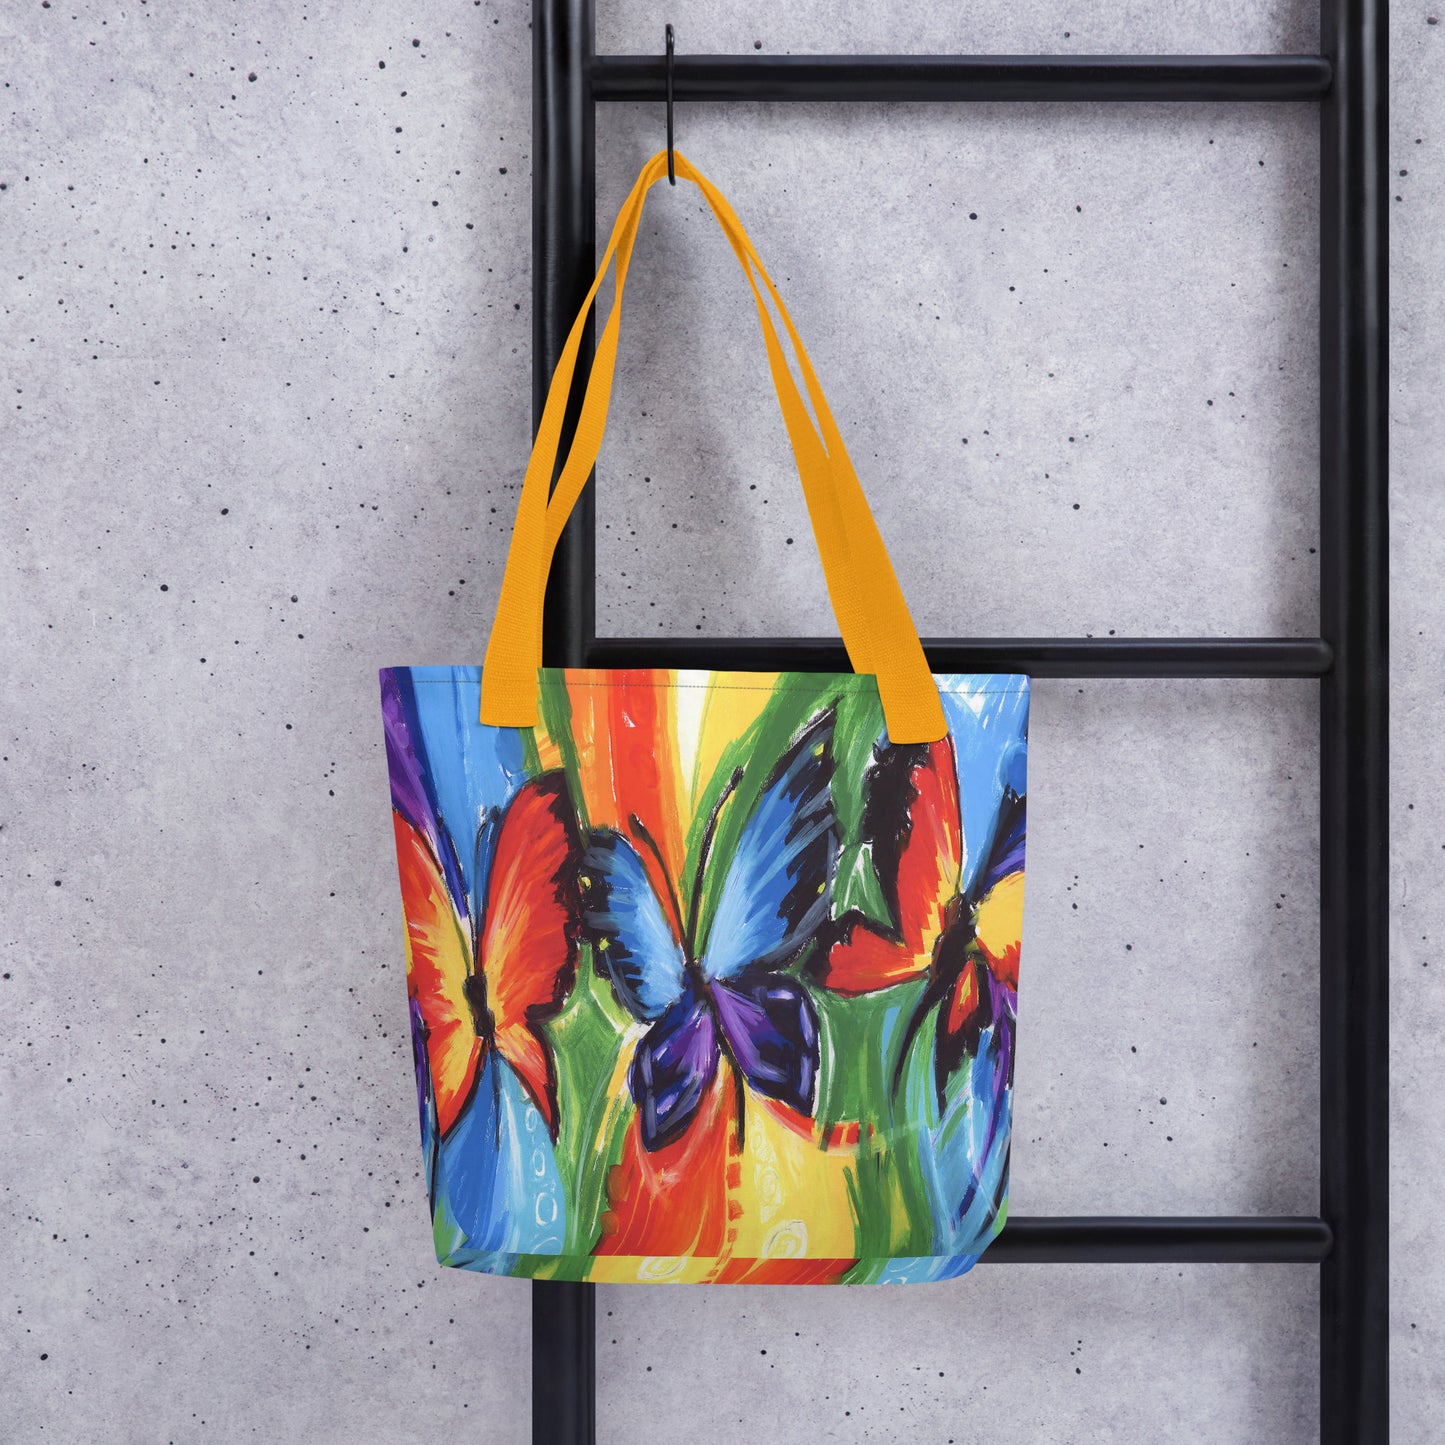 Colorful Butterflies - Tote bag